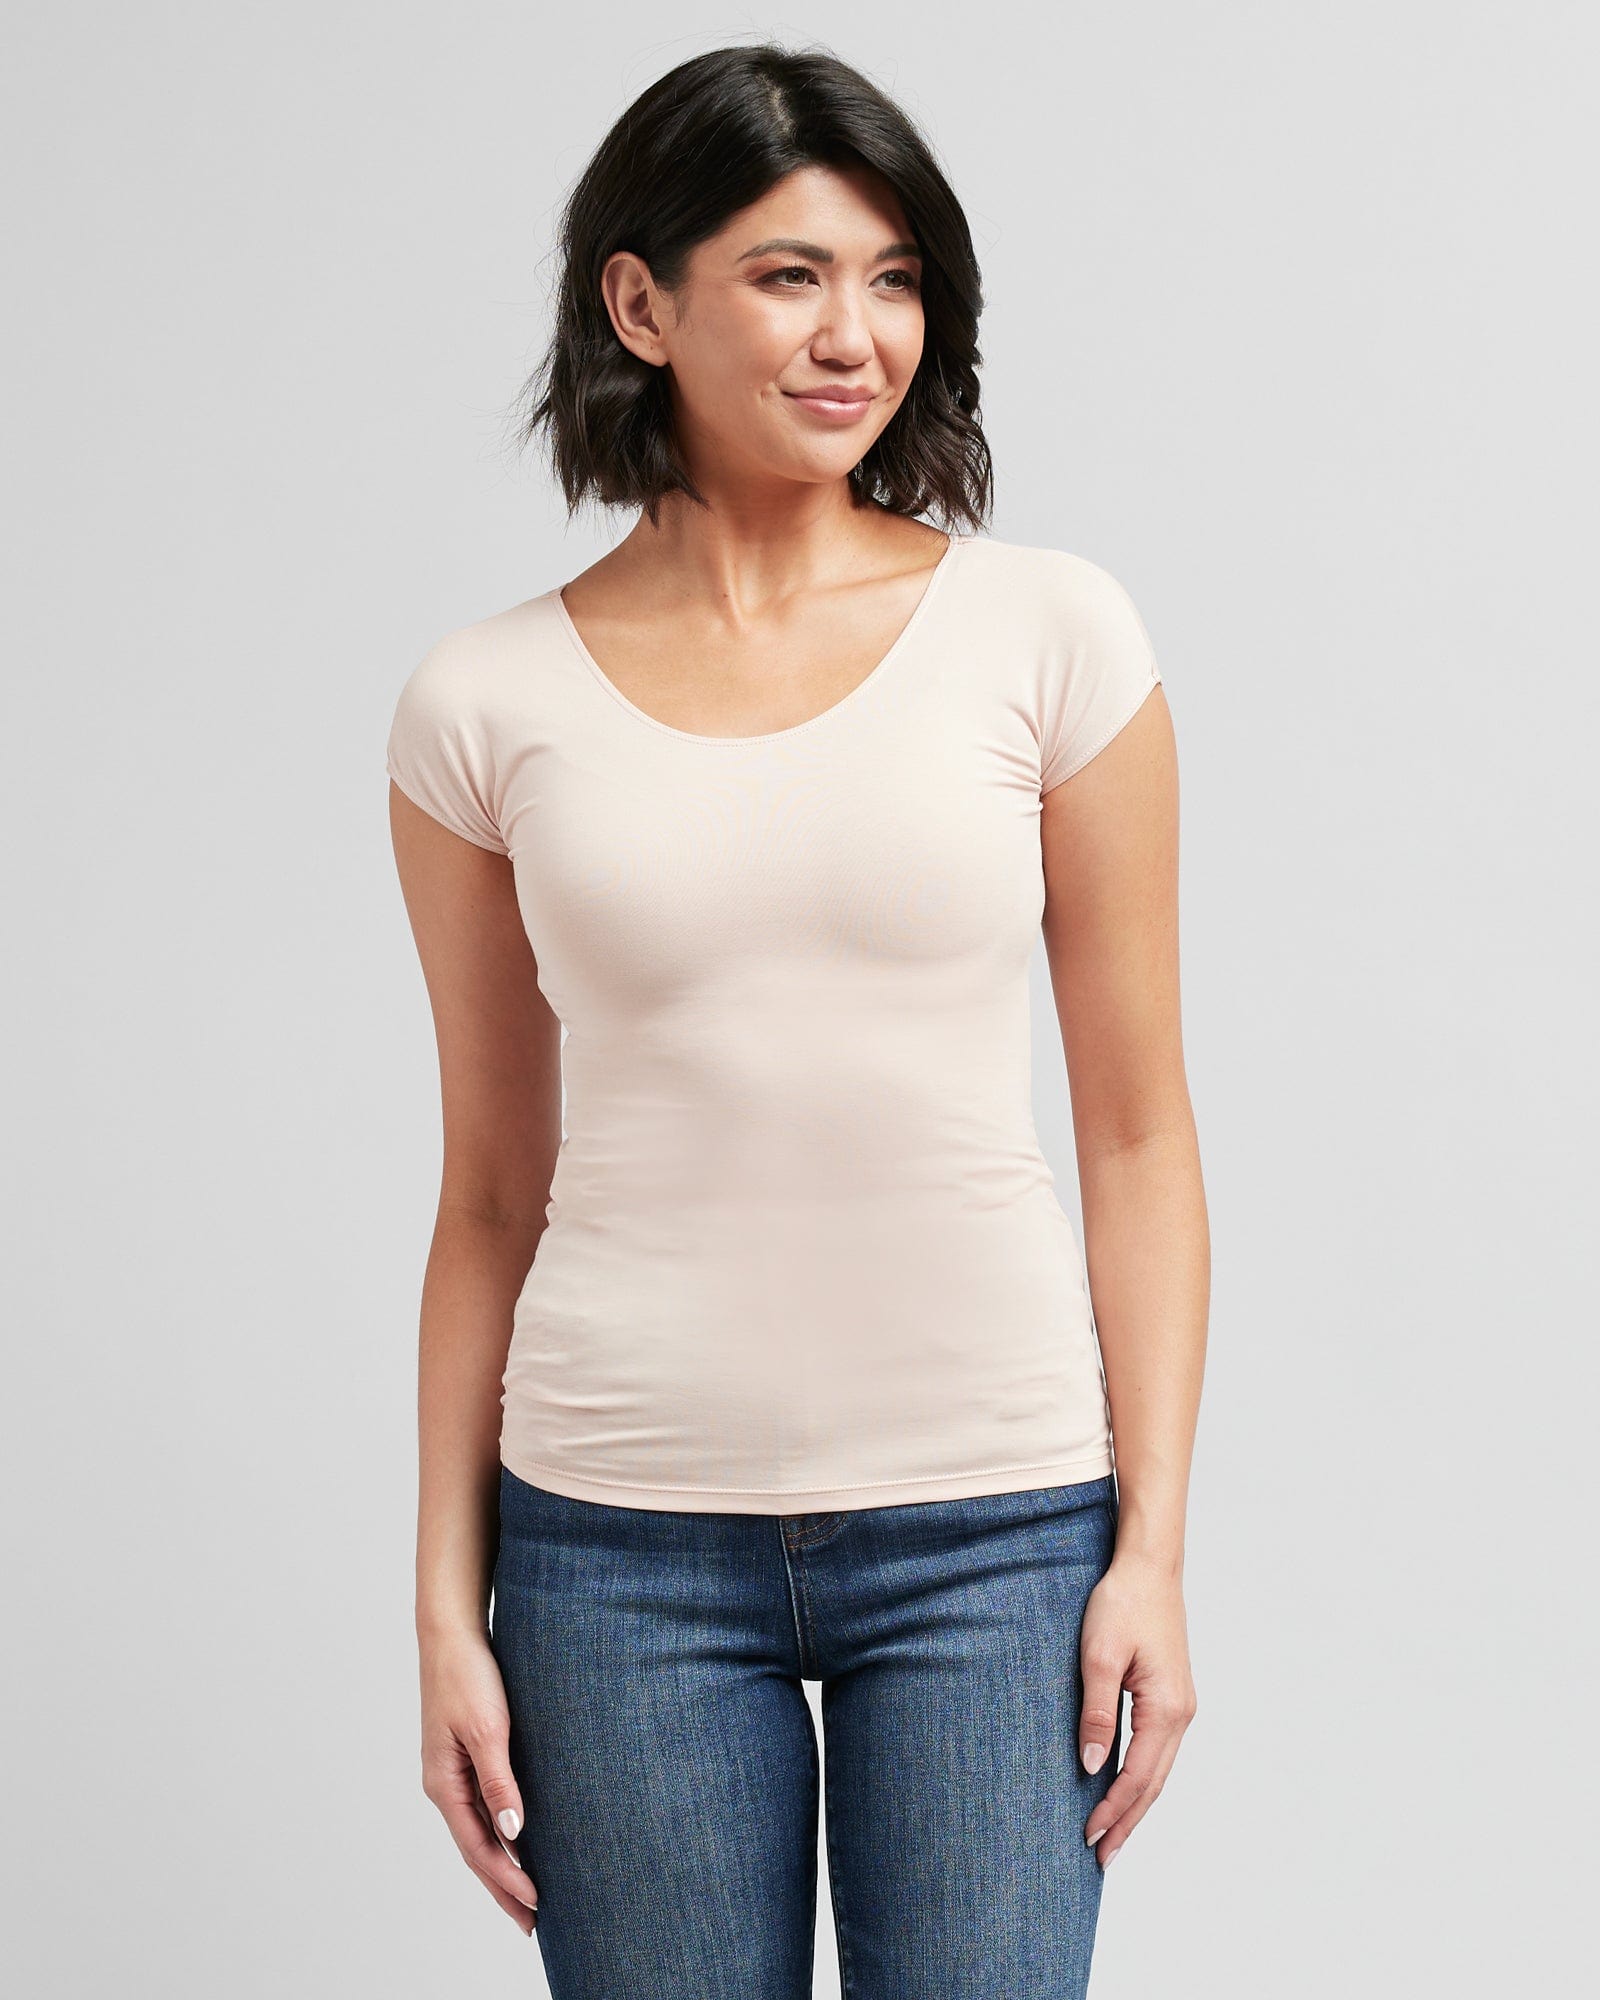 Woman in a short sleeve, fitted, basic tee